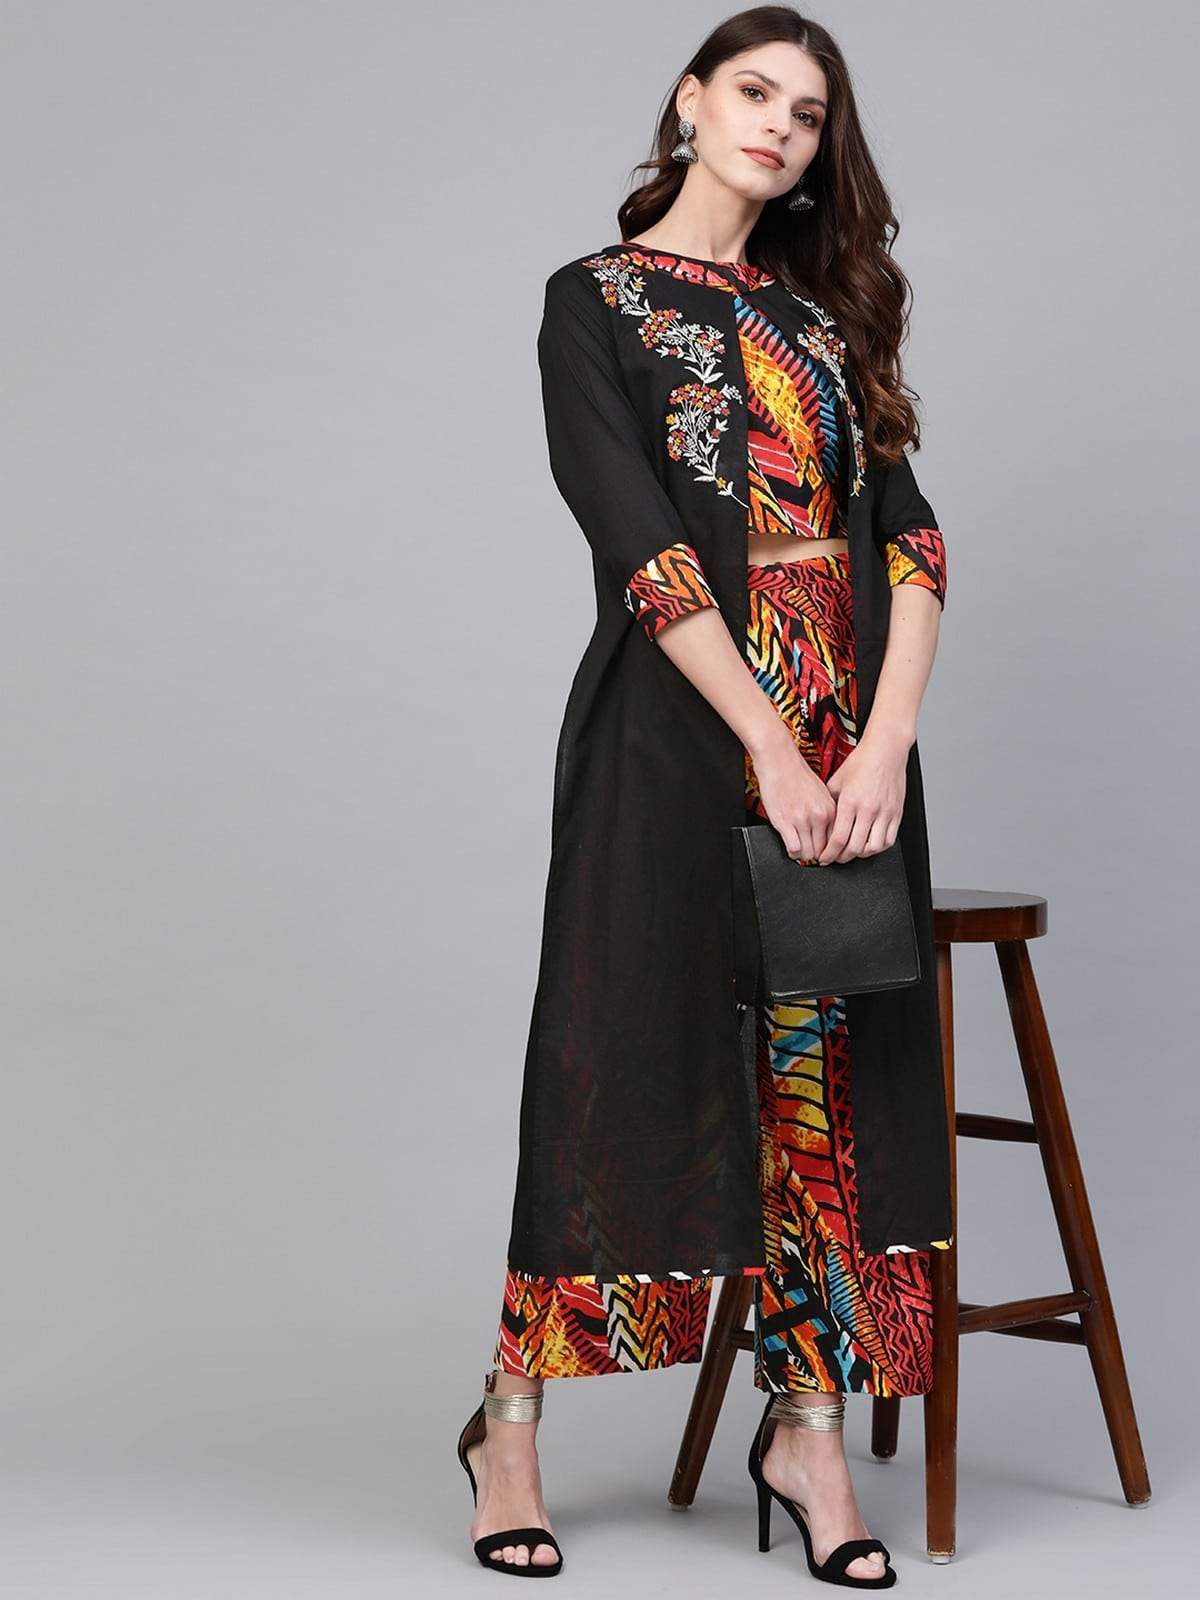 Women's Embroidered Shrug With Printed Top And Pants - Pannkh